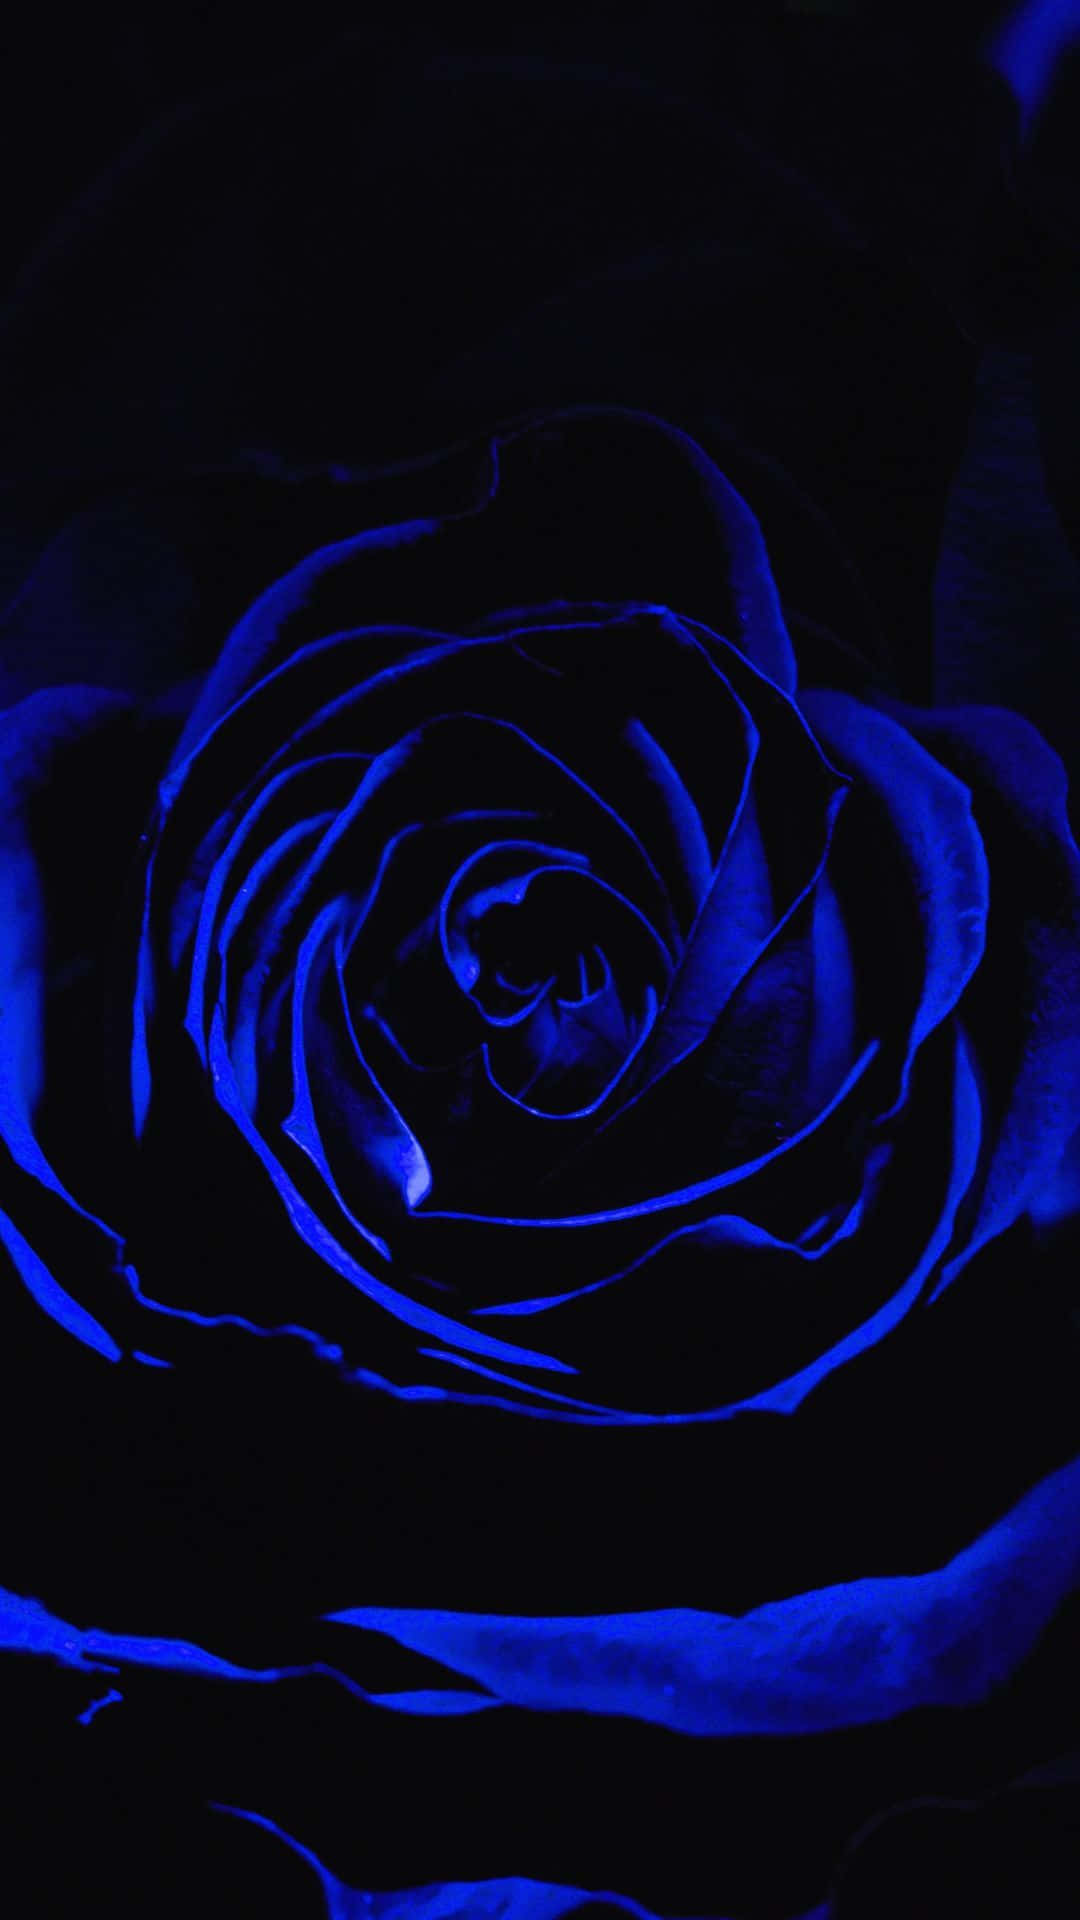 Dark Blue Rose Abstract – A beautiful mix of dark blue and pink colored rose petals. Wallpaper